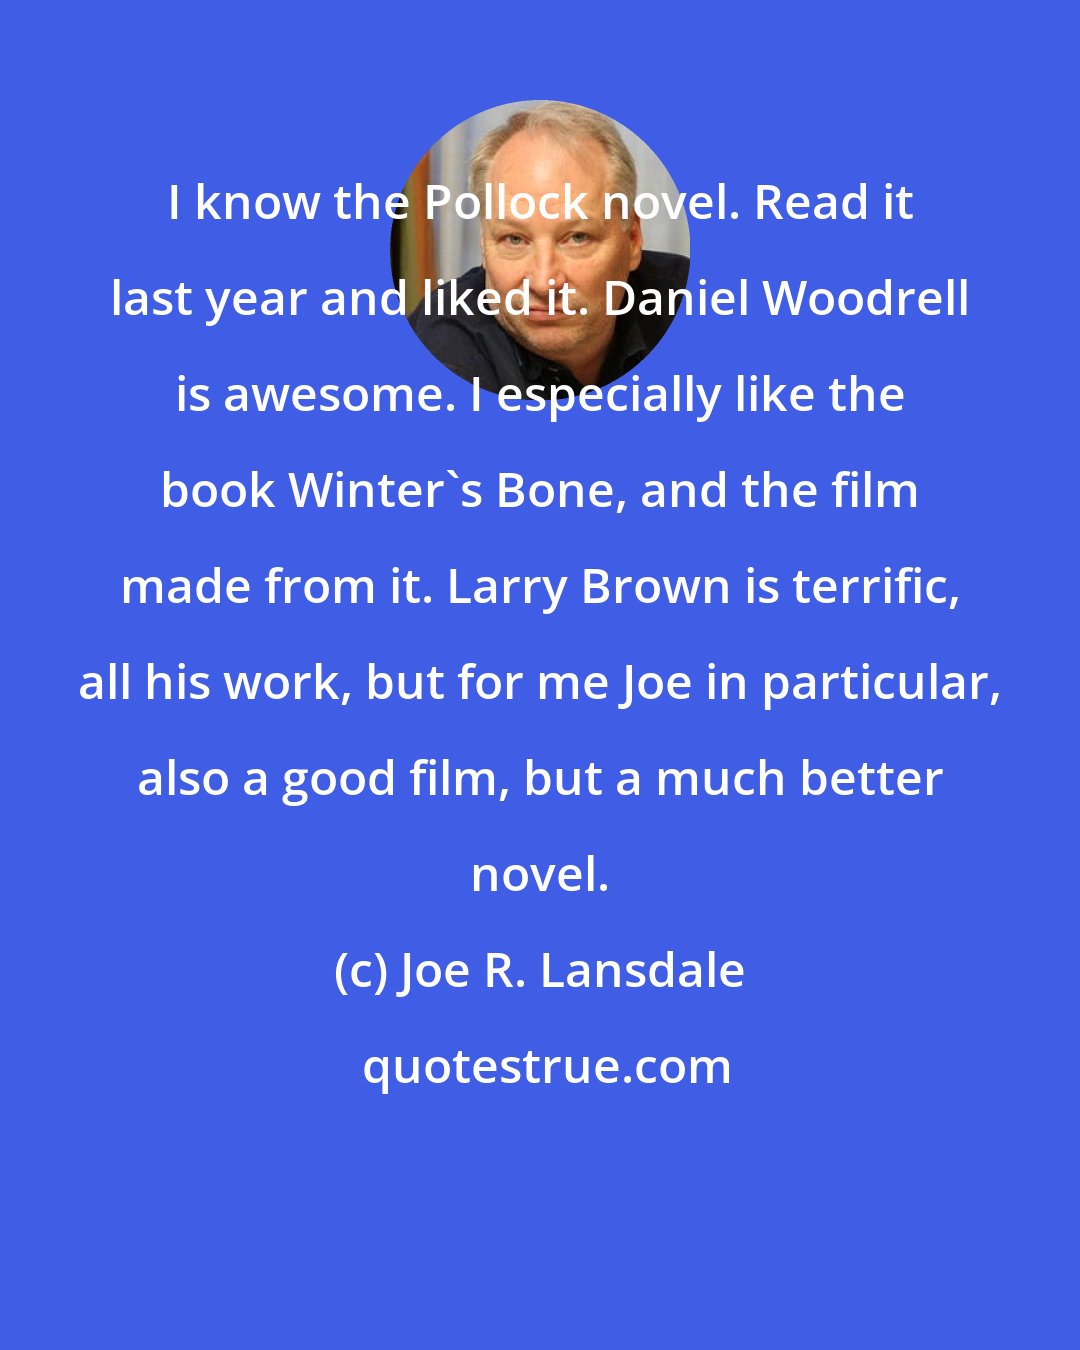 Joe R. Lansdale: I know the Pollock novel. Read it last year and liked it. Daniel Woodrell is awesome. I especially like the book Winter's Bone, and the film made from it. Larry Brown is terrific, all his work, but for me Joe in particular, also a good film, but a much better novel.